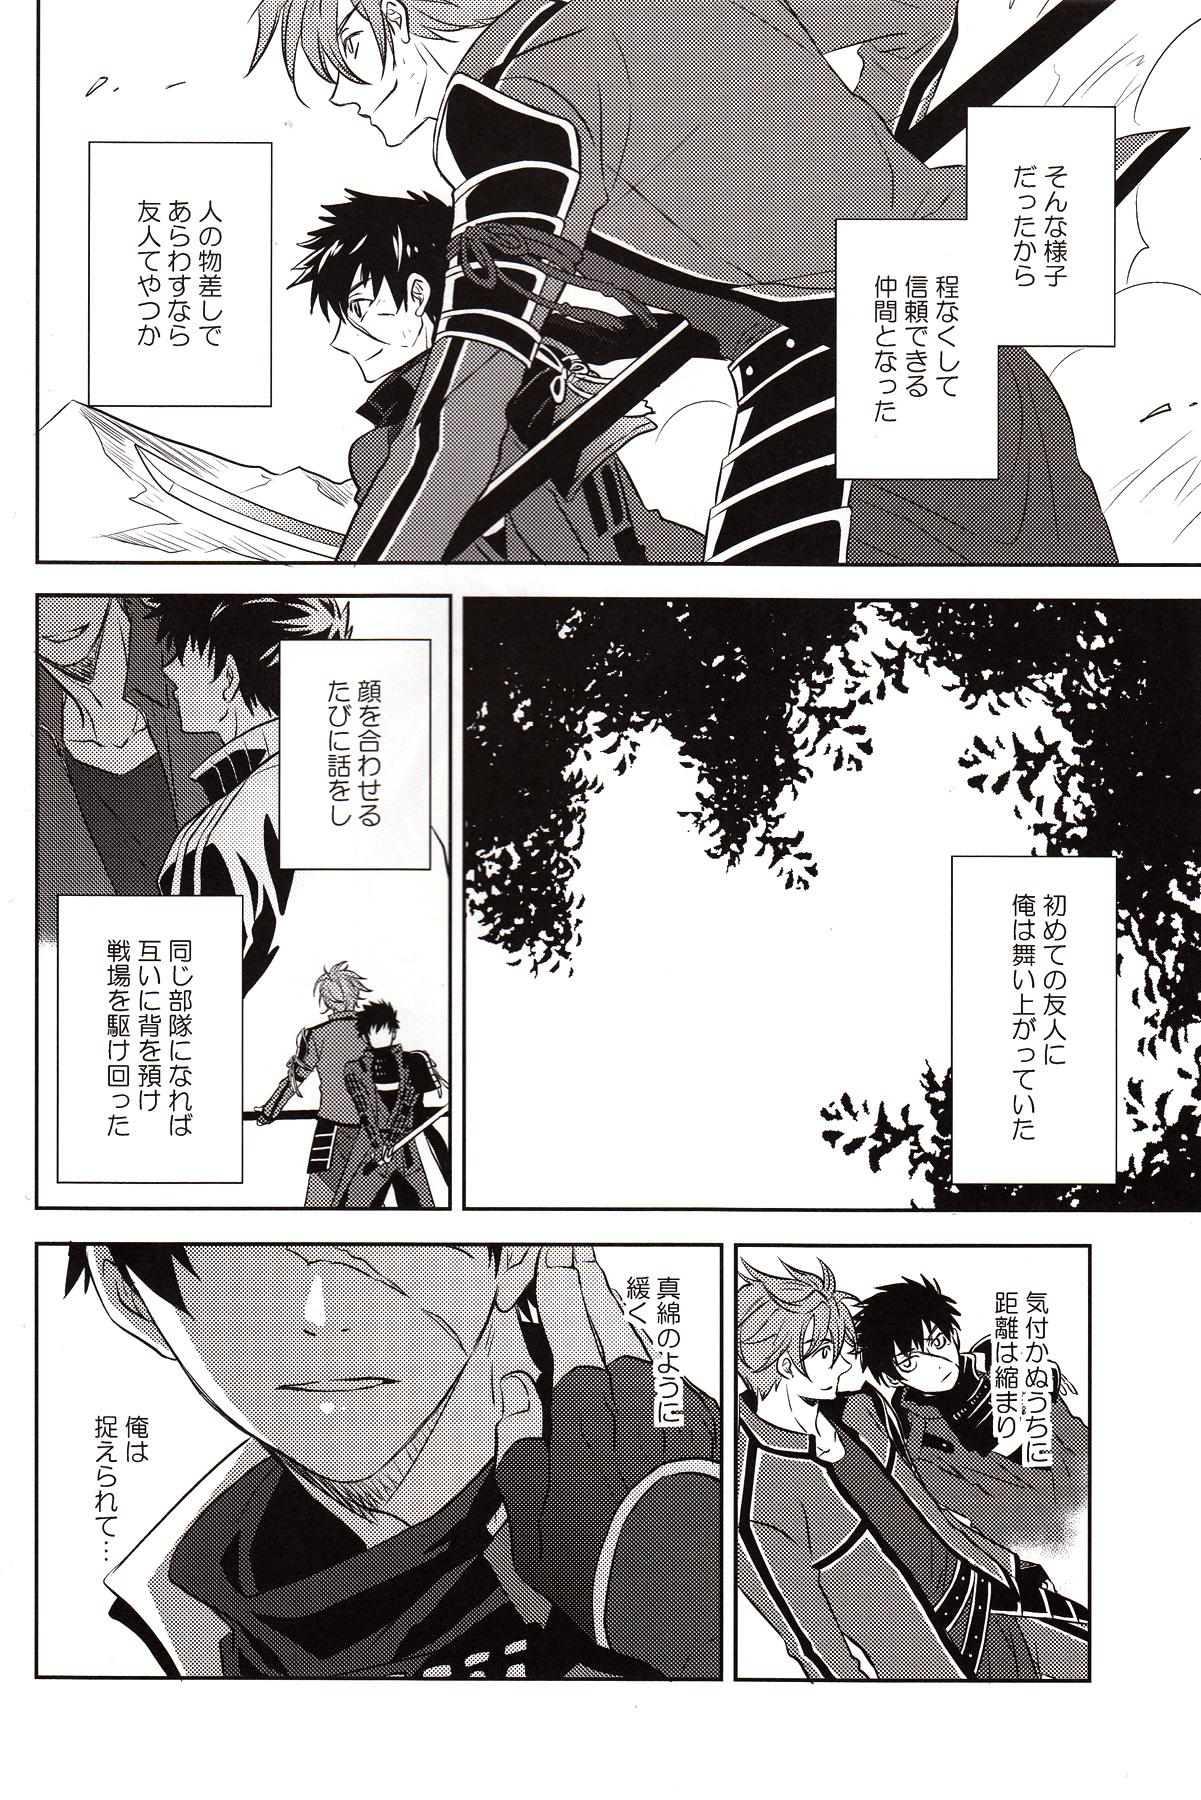 Exposed The Name of it - Touken ranbu Cock Suck - Page 5